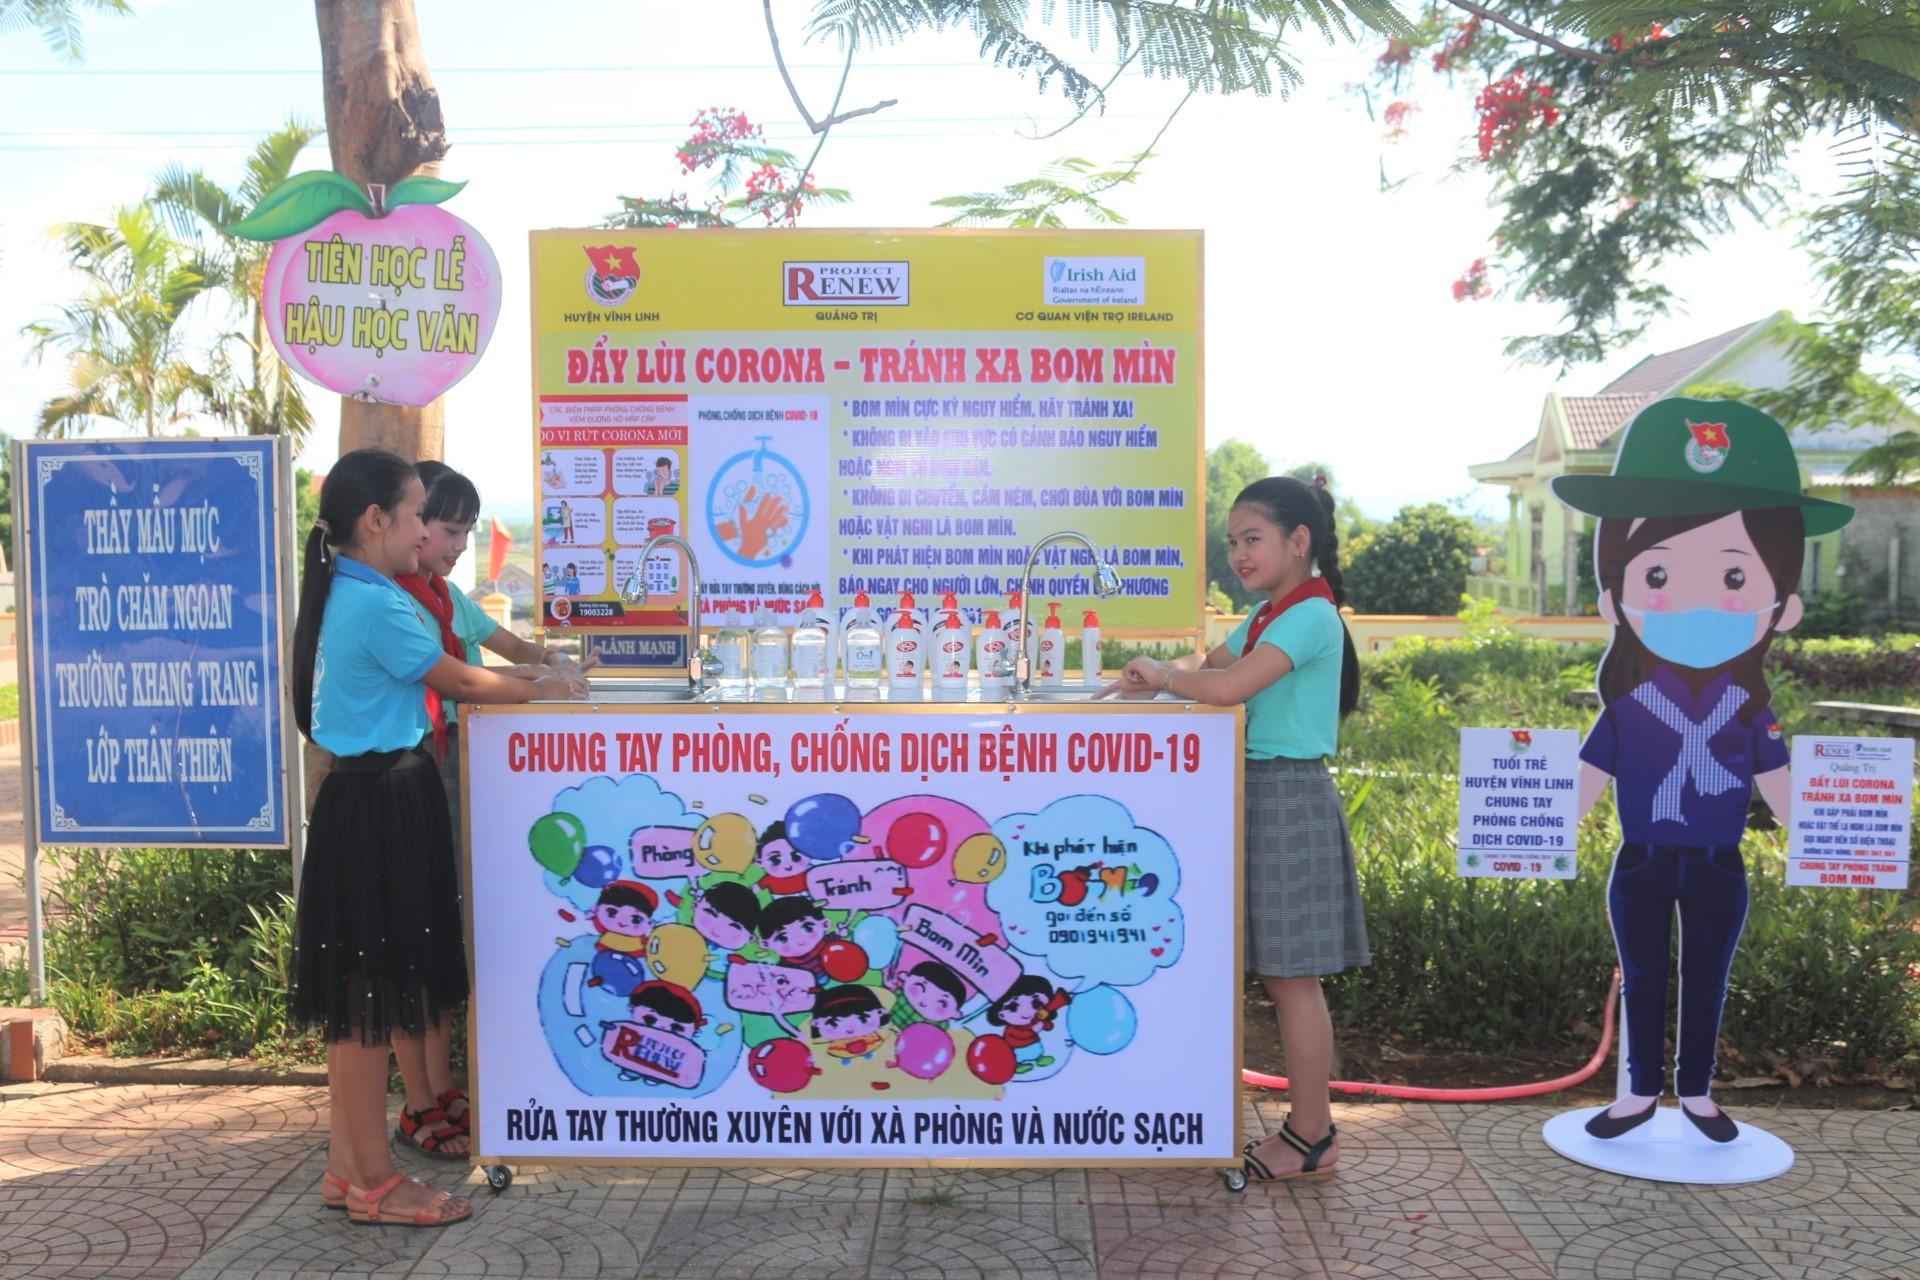 project renew equips five school in quang tri with portable washbasins